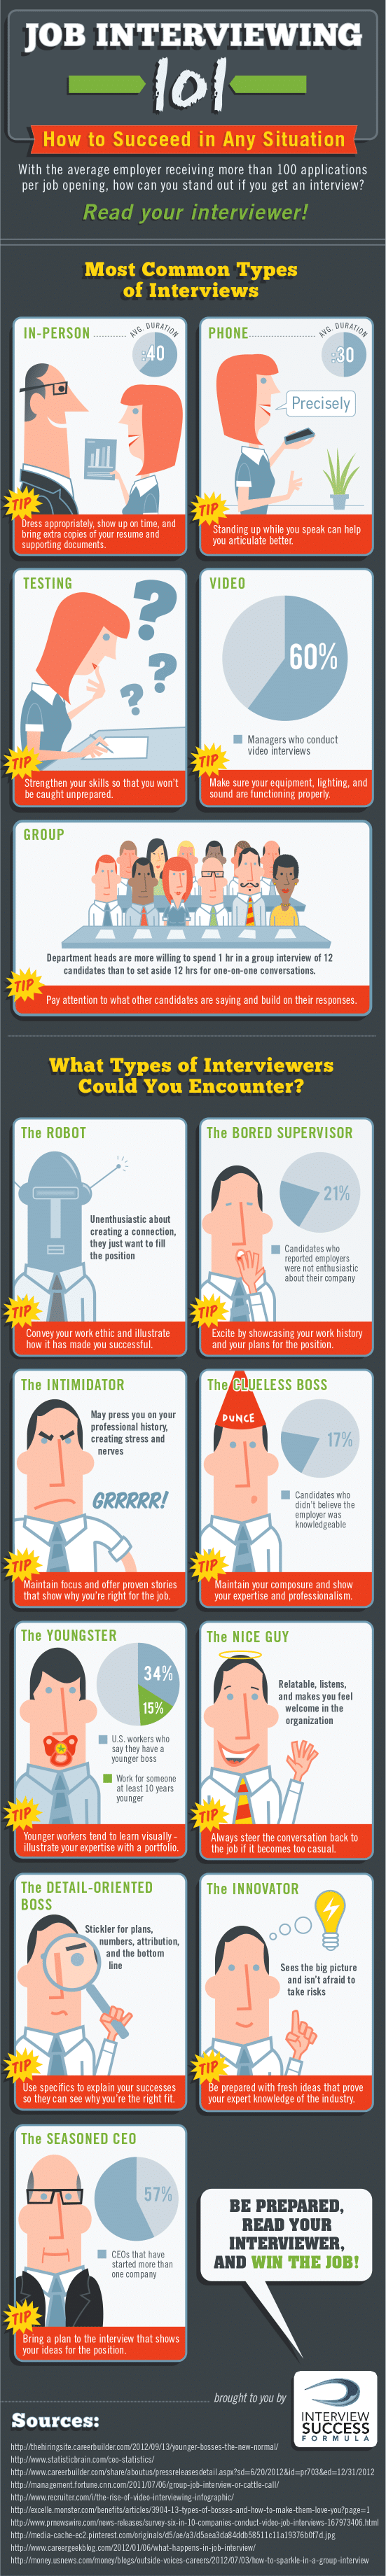 14-job-interview-tips-infographic